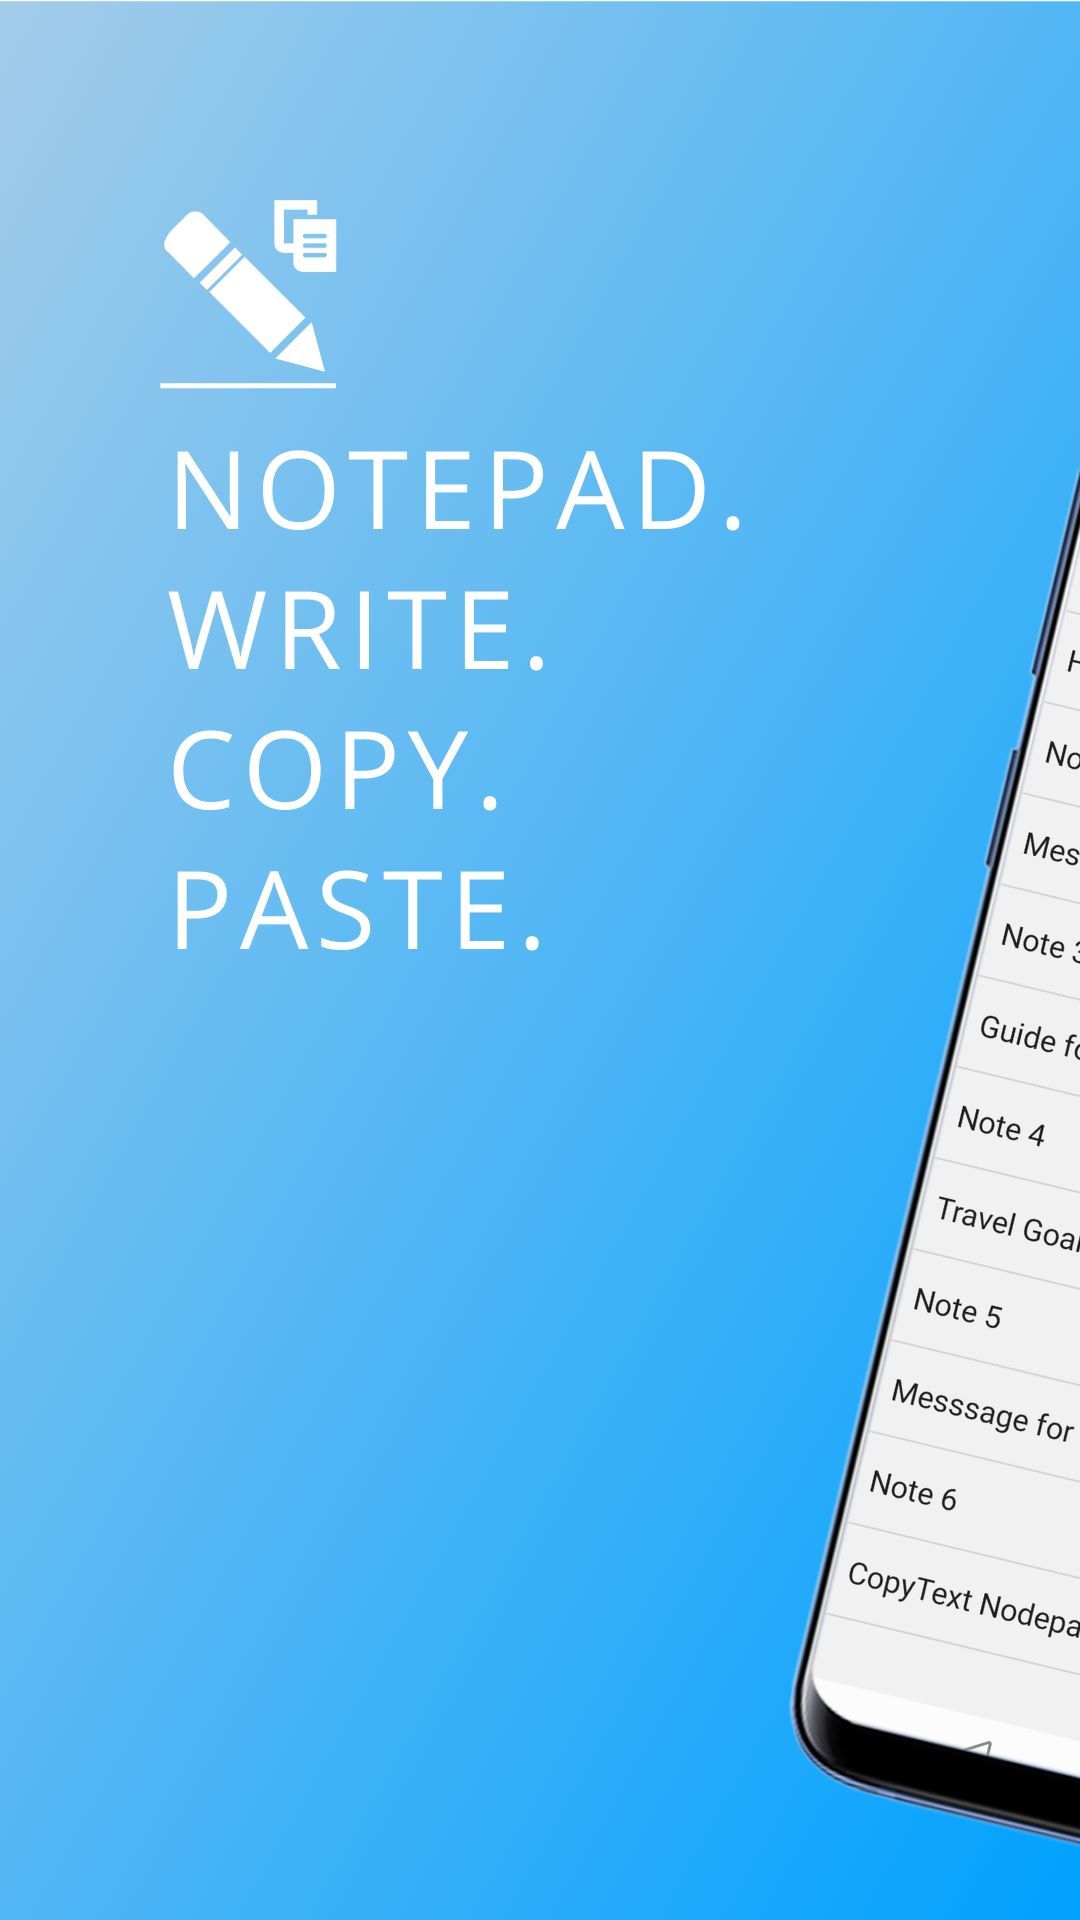 CopyText - Notepad copy and paste Notes